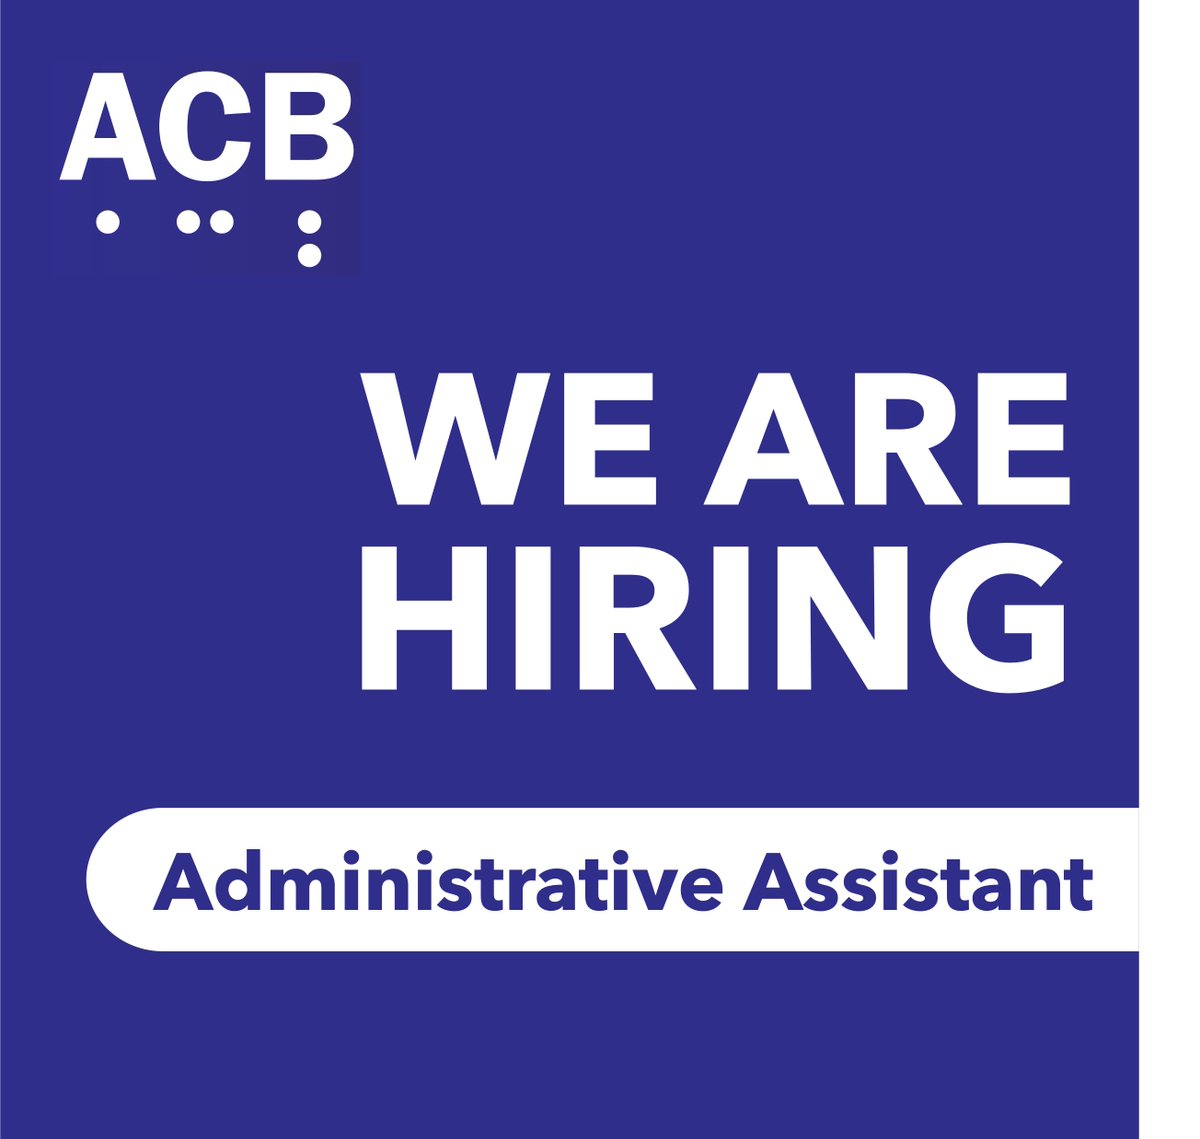 ACB is hiring! We’re searching for an Administrative Assistant to provide support to our fast-paced Alexandria, VA office. Responsibilities include fielding incoming calls, processing mail, and providing excellent customer service. For more info, visit: acb.org/jobs#Administr…